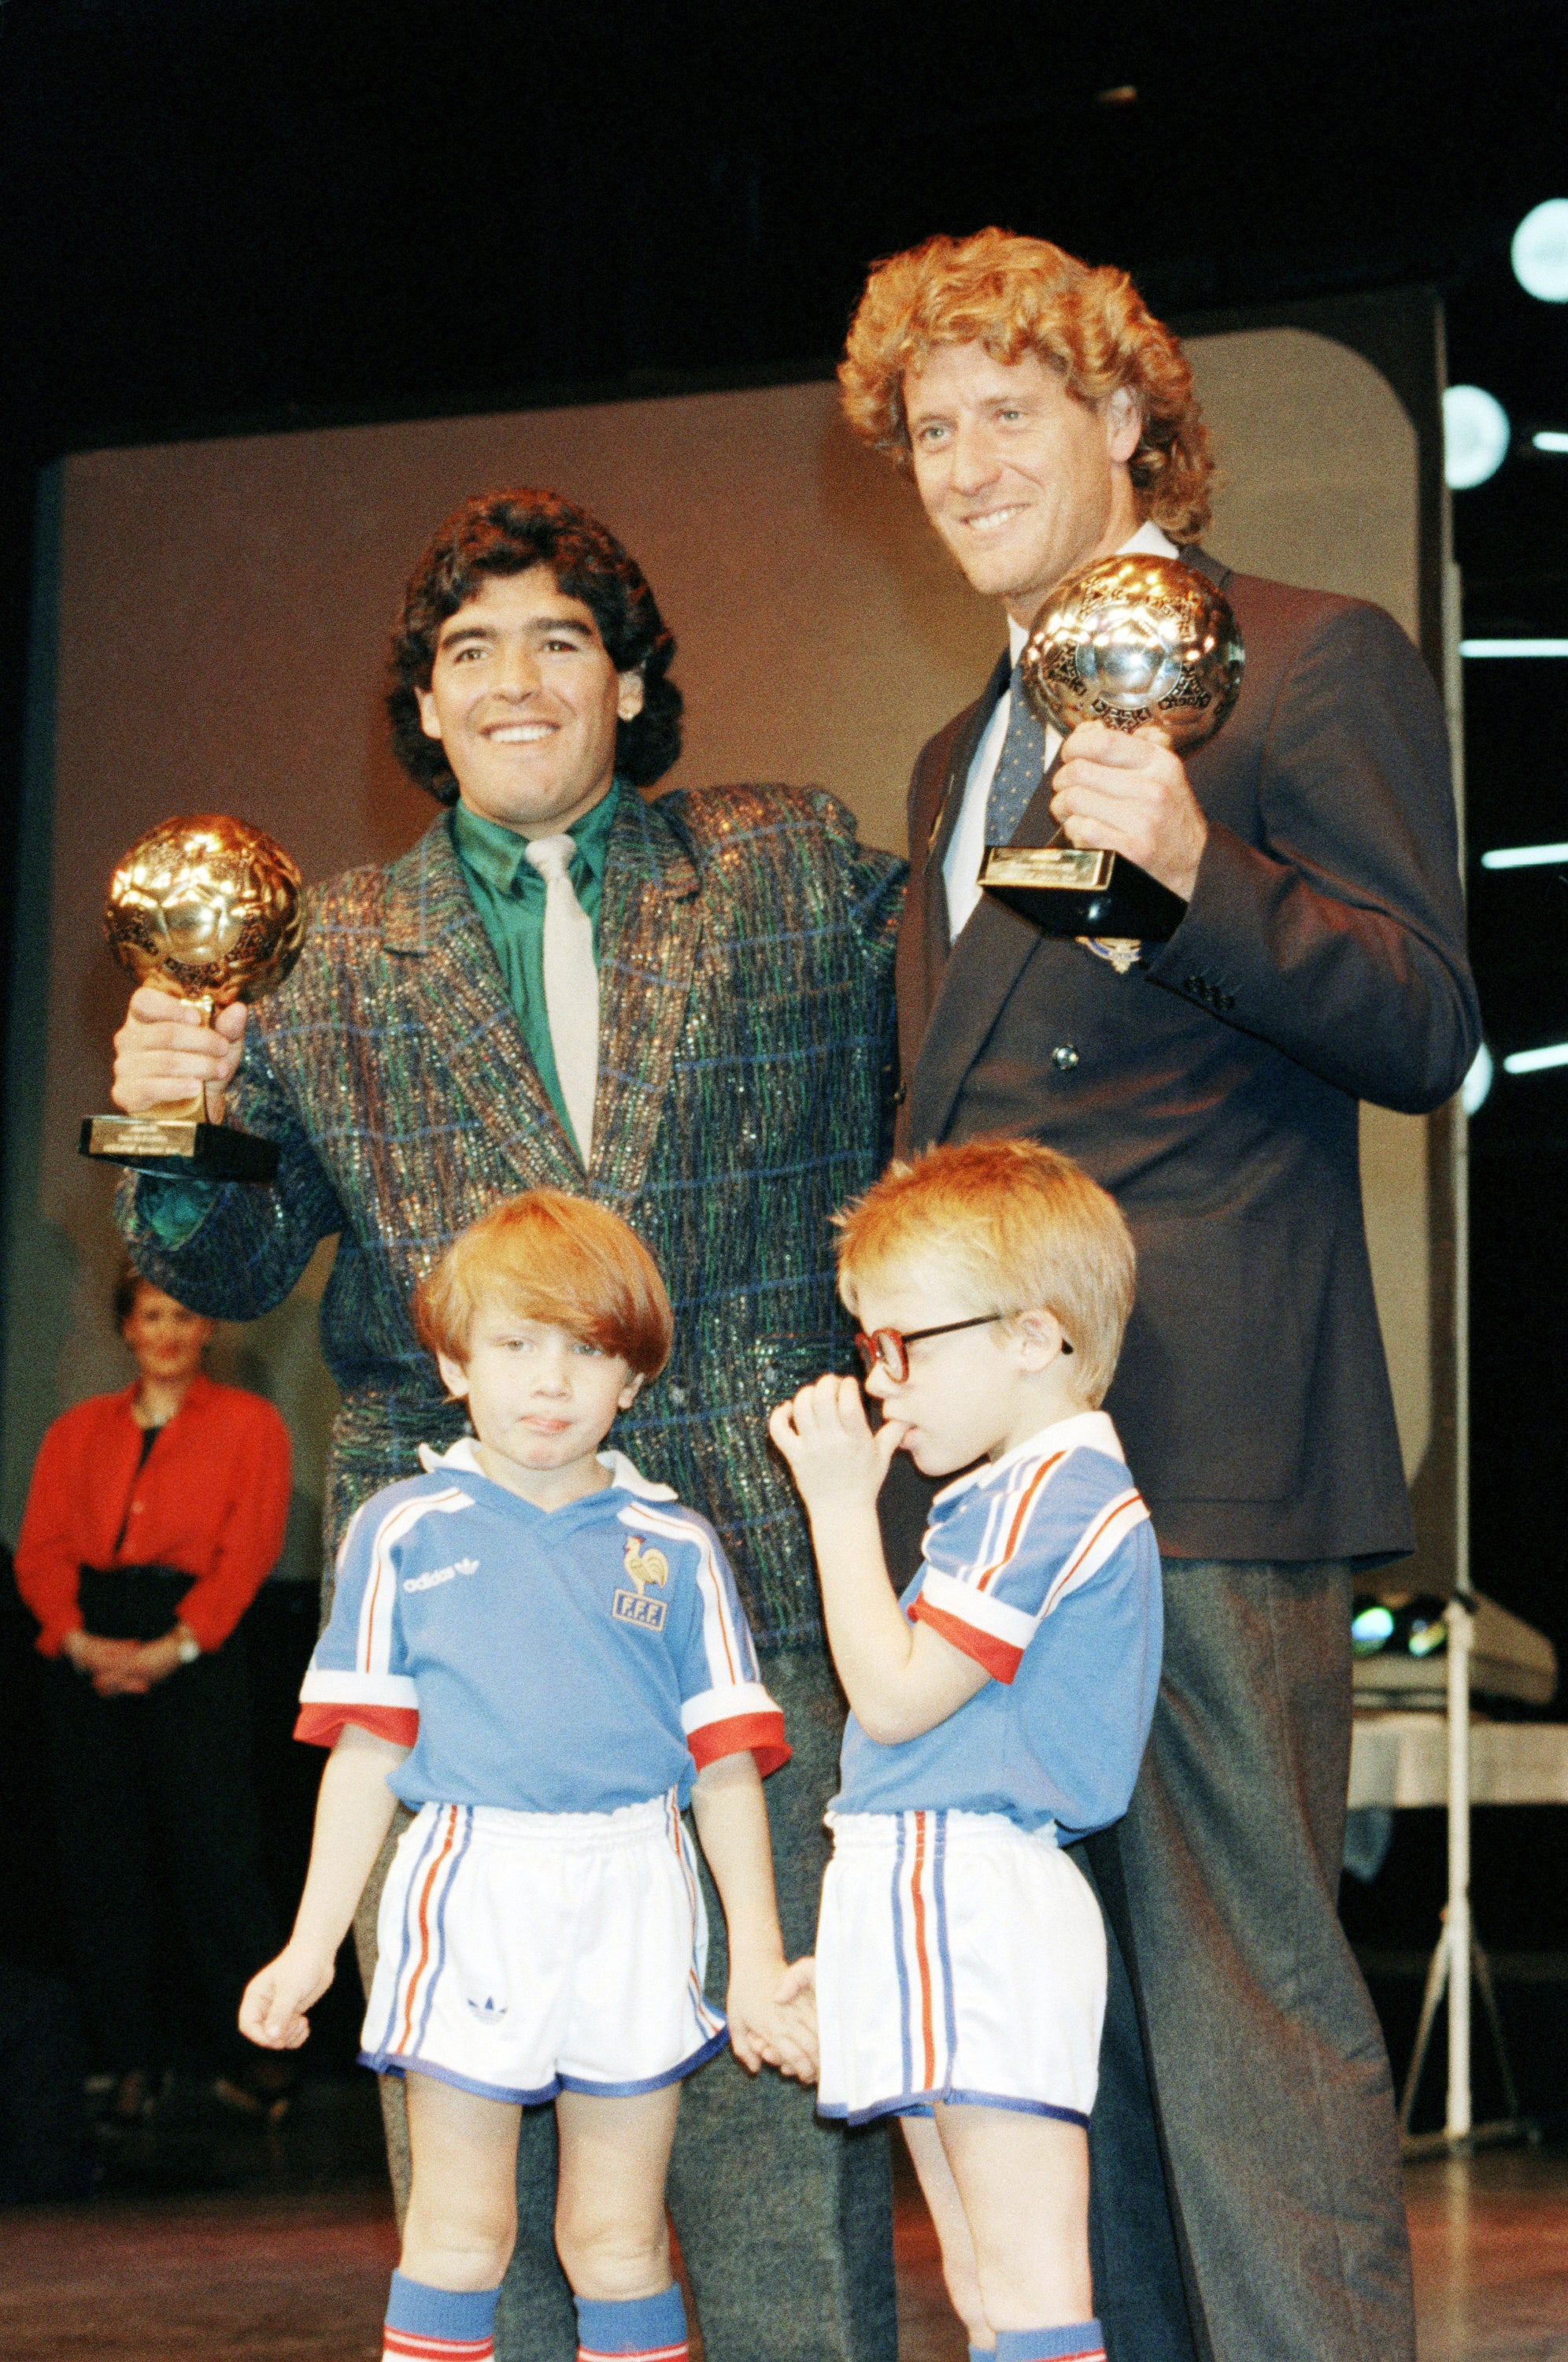 maradona’s stolen world cup golden ball trophy to be auctioned in paris